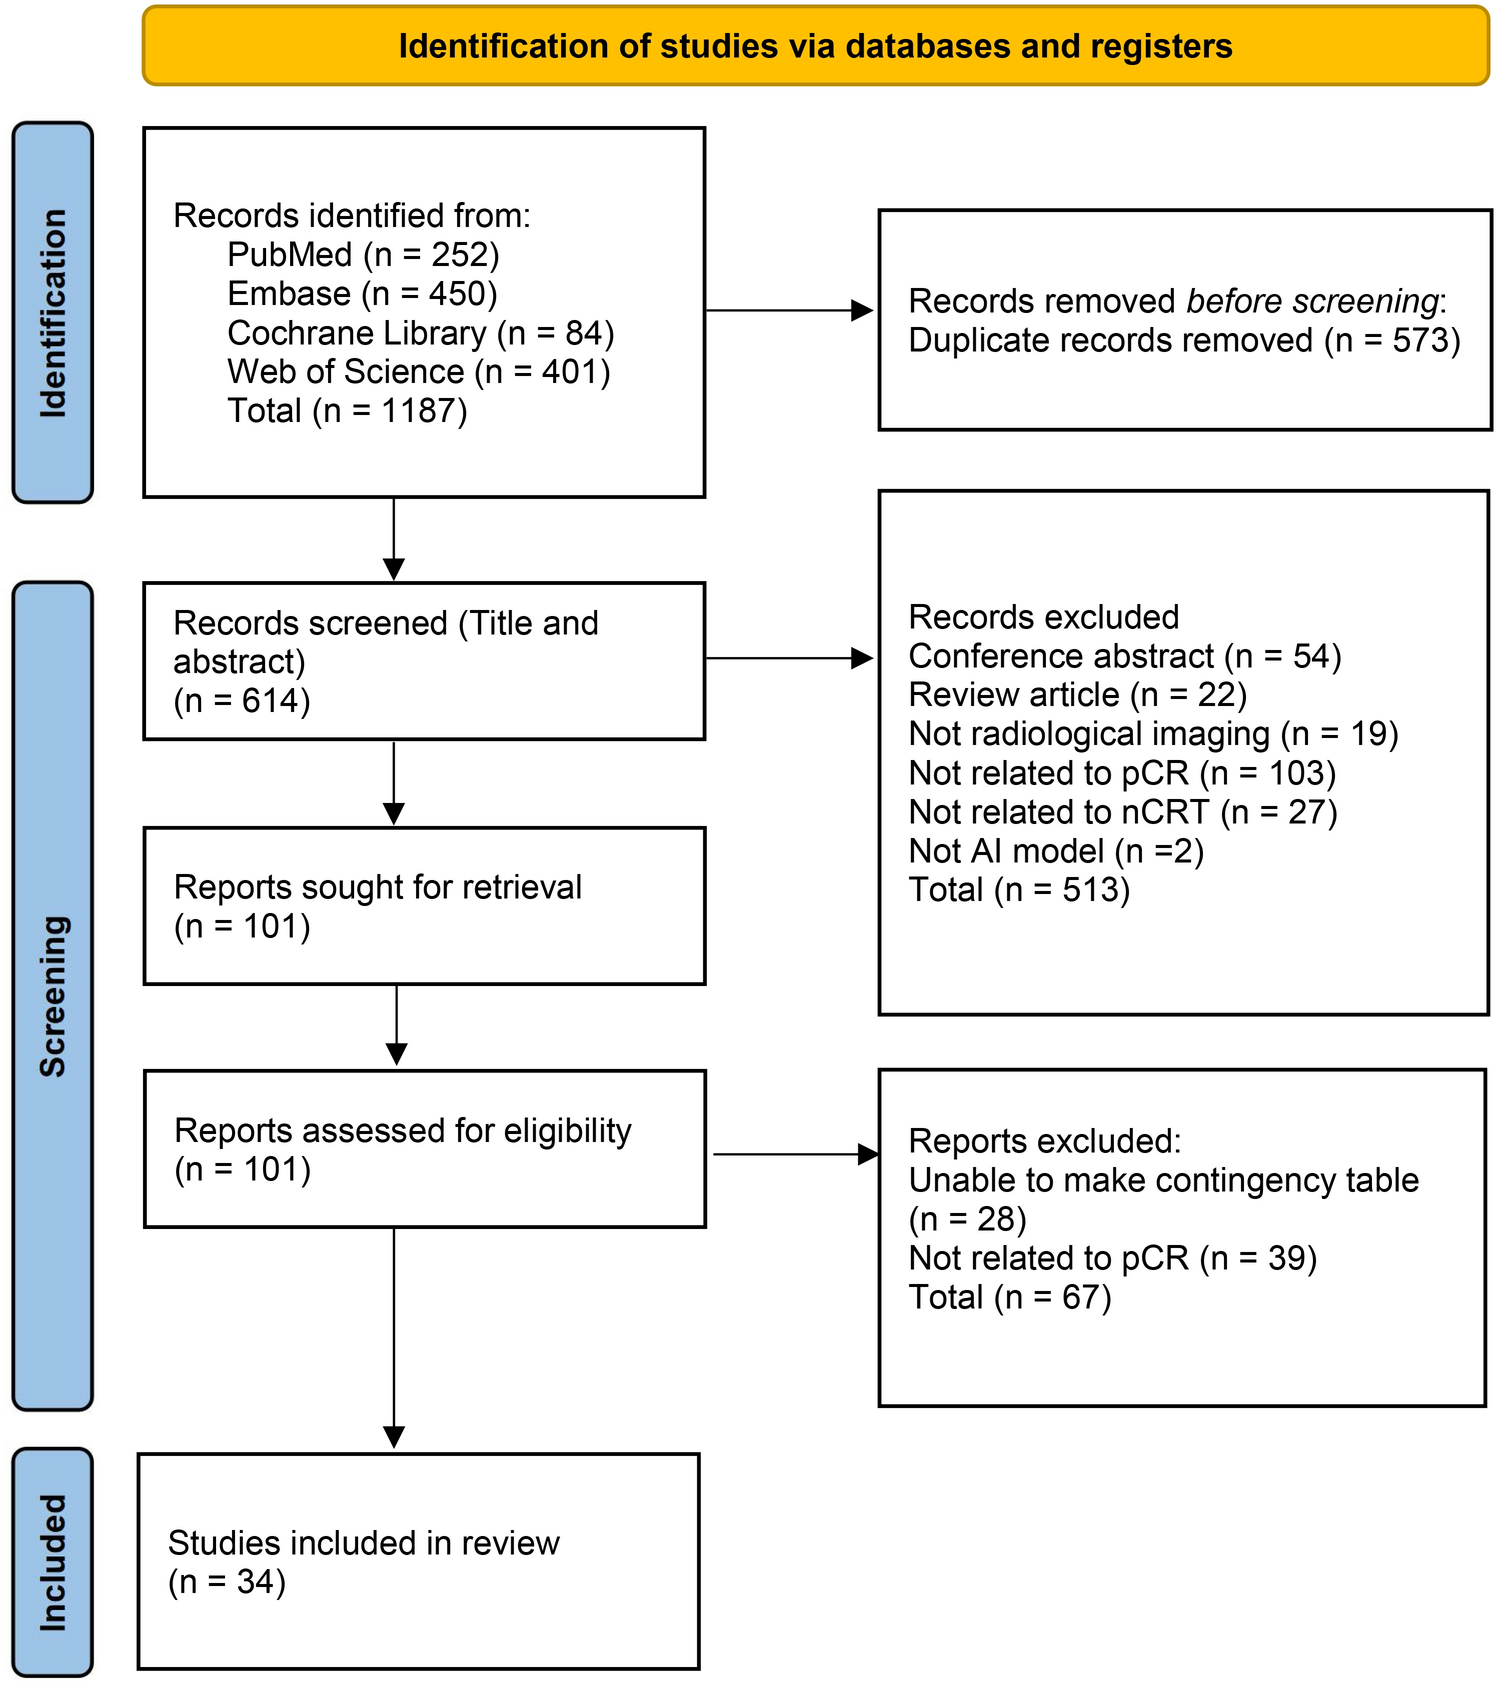 Image-based artificial intelligence for the prediction of pathological complete response to neoadjuvant chemoradiotherapy in patients with rectal cancer: a systematic review and meta-analysis